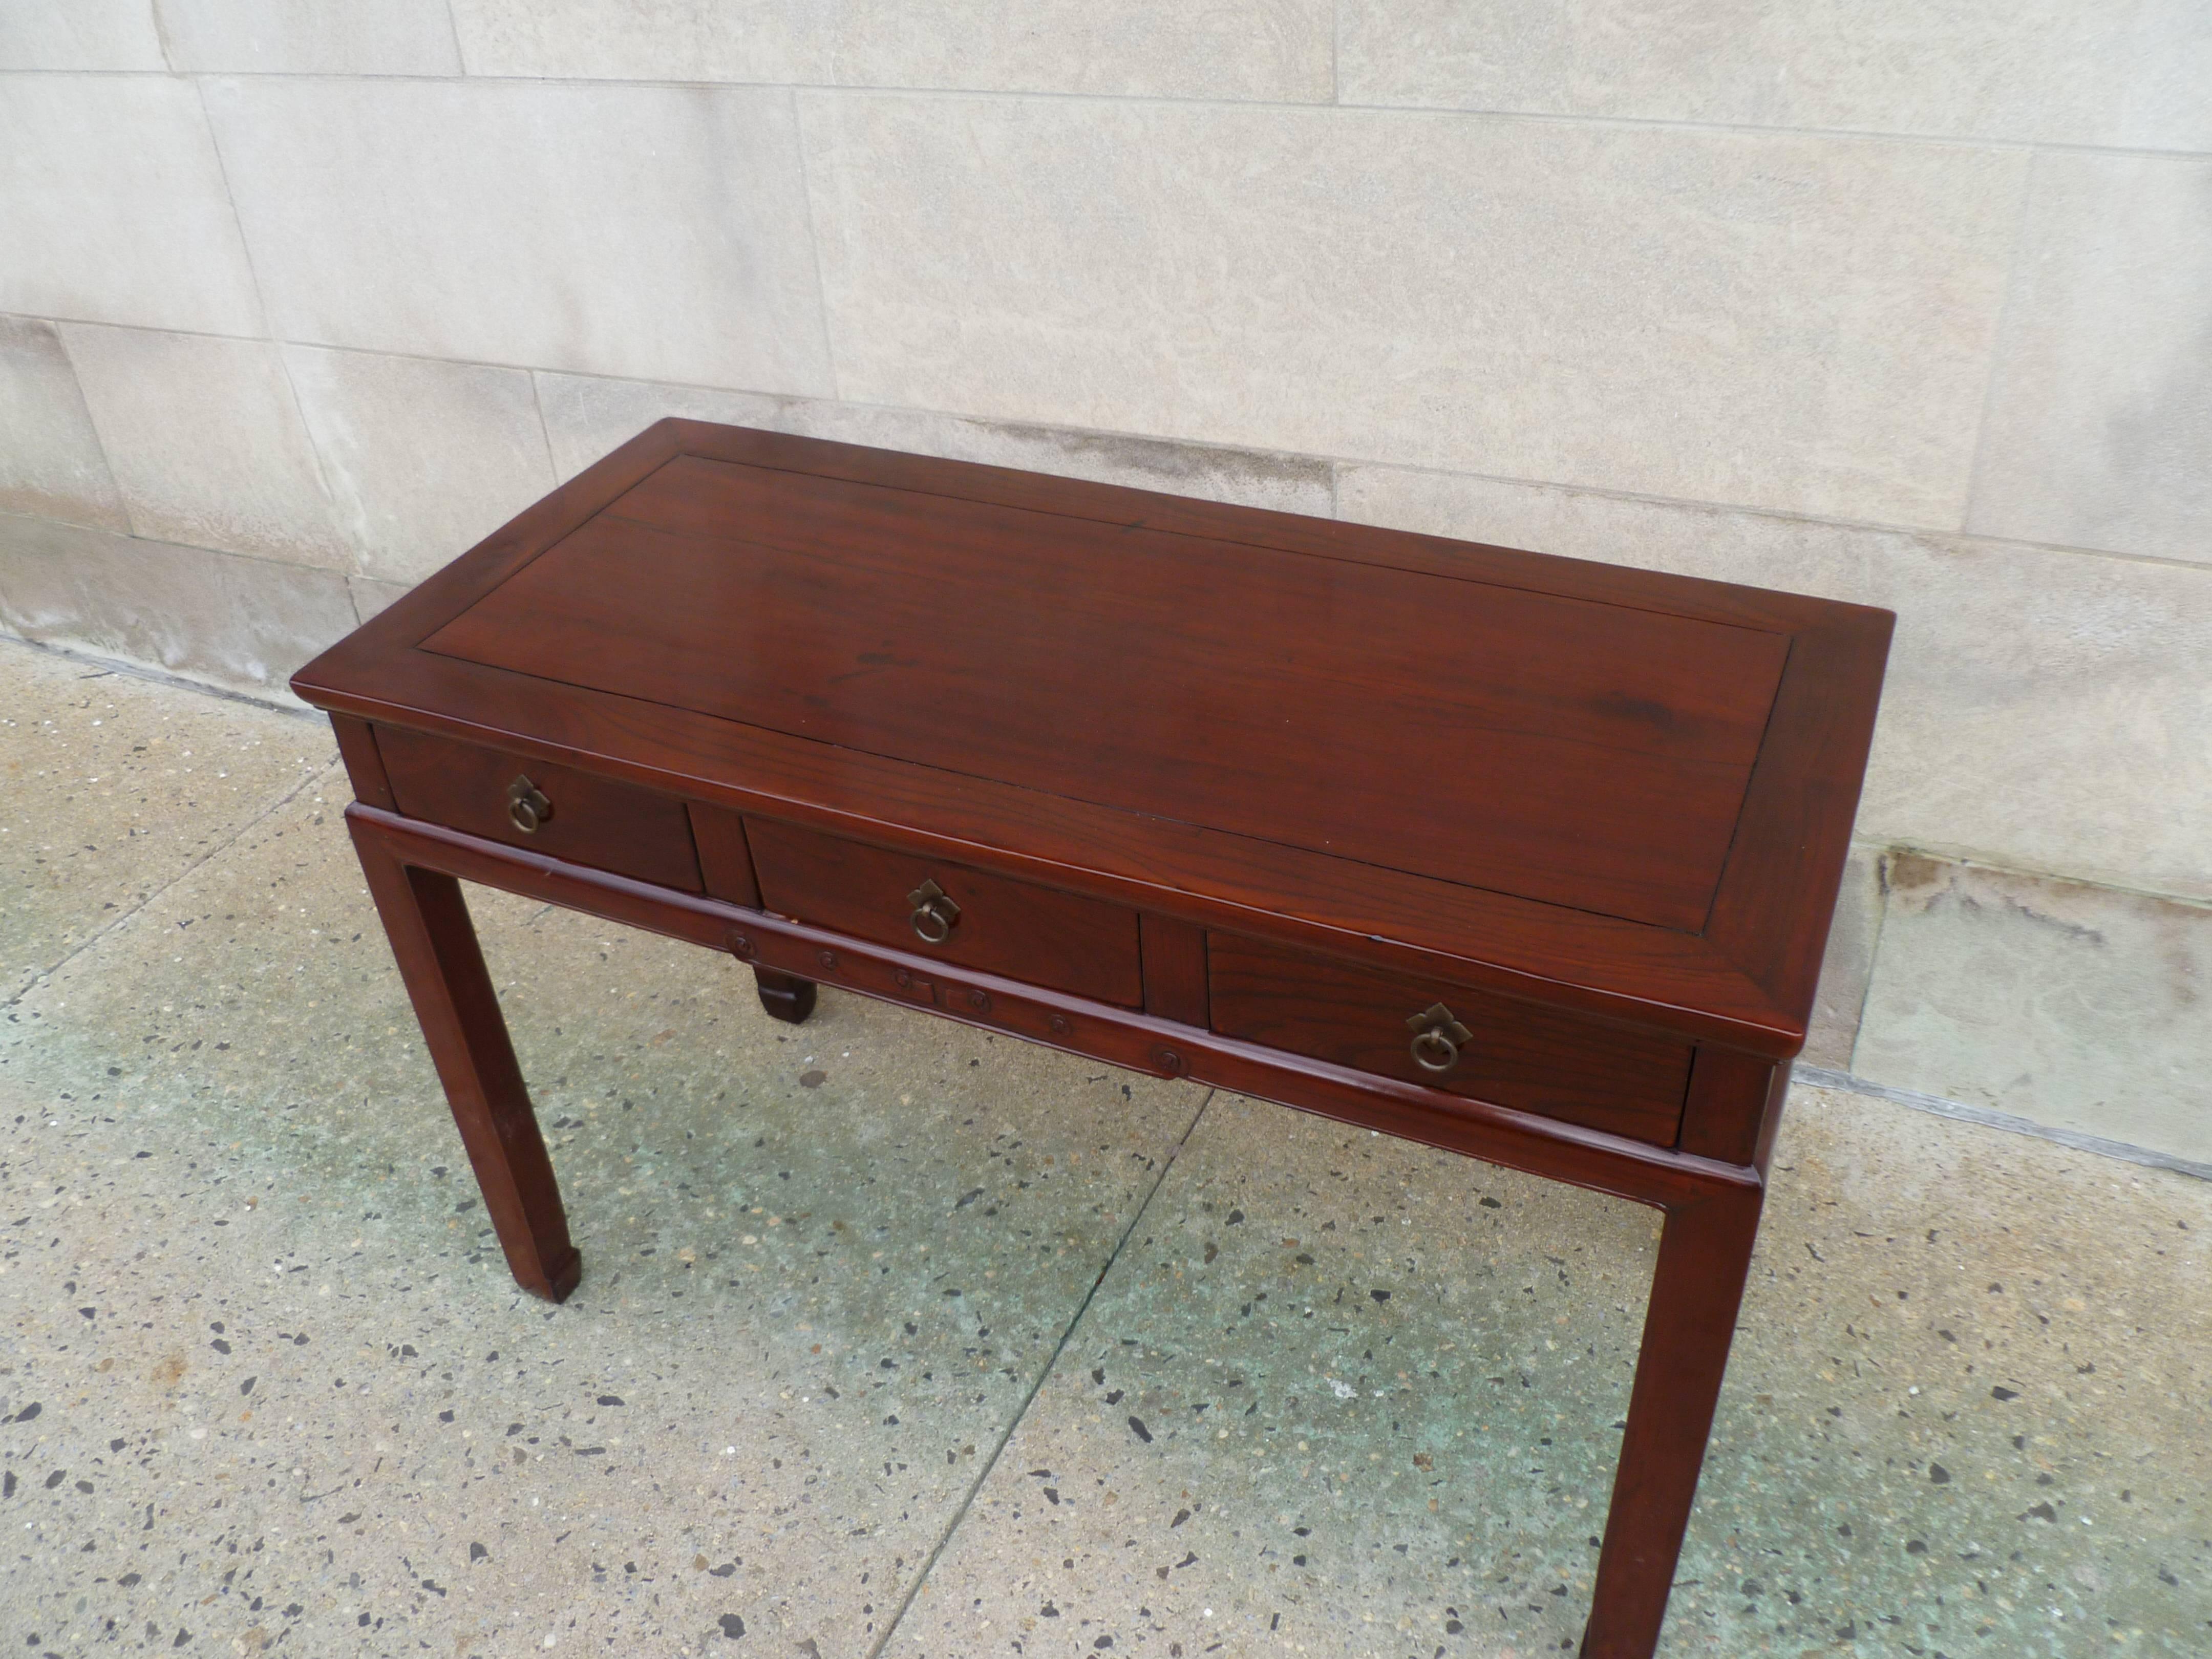 Wood Fine Jumu Console Table or Desk with Drawers